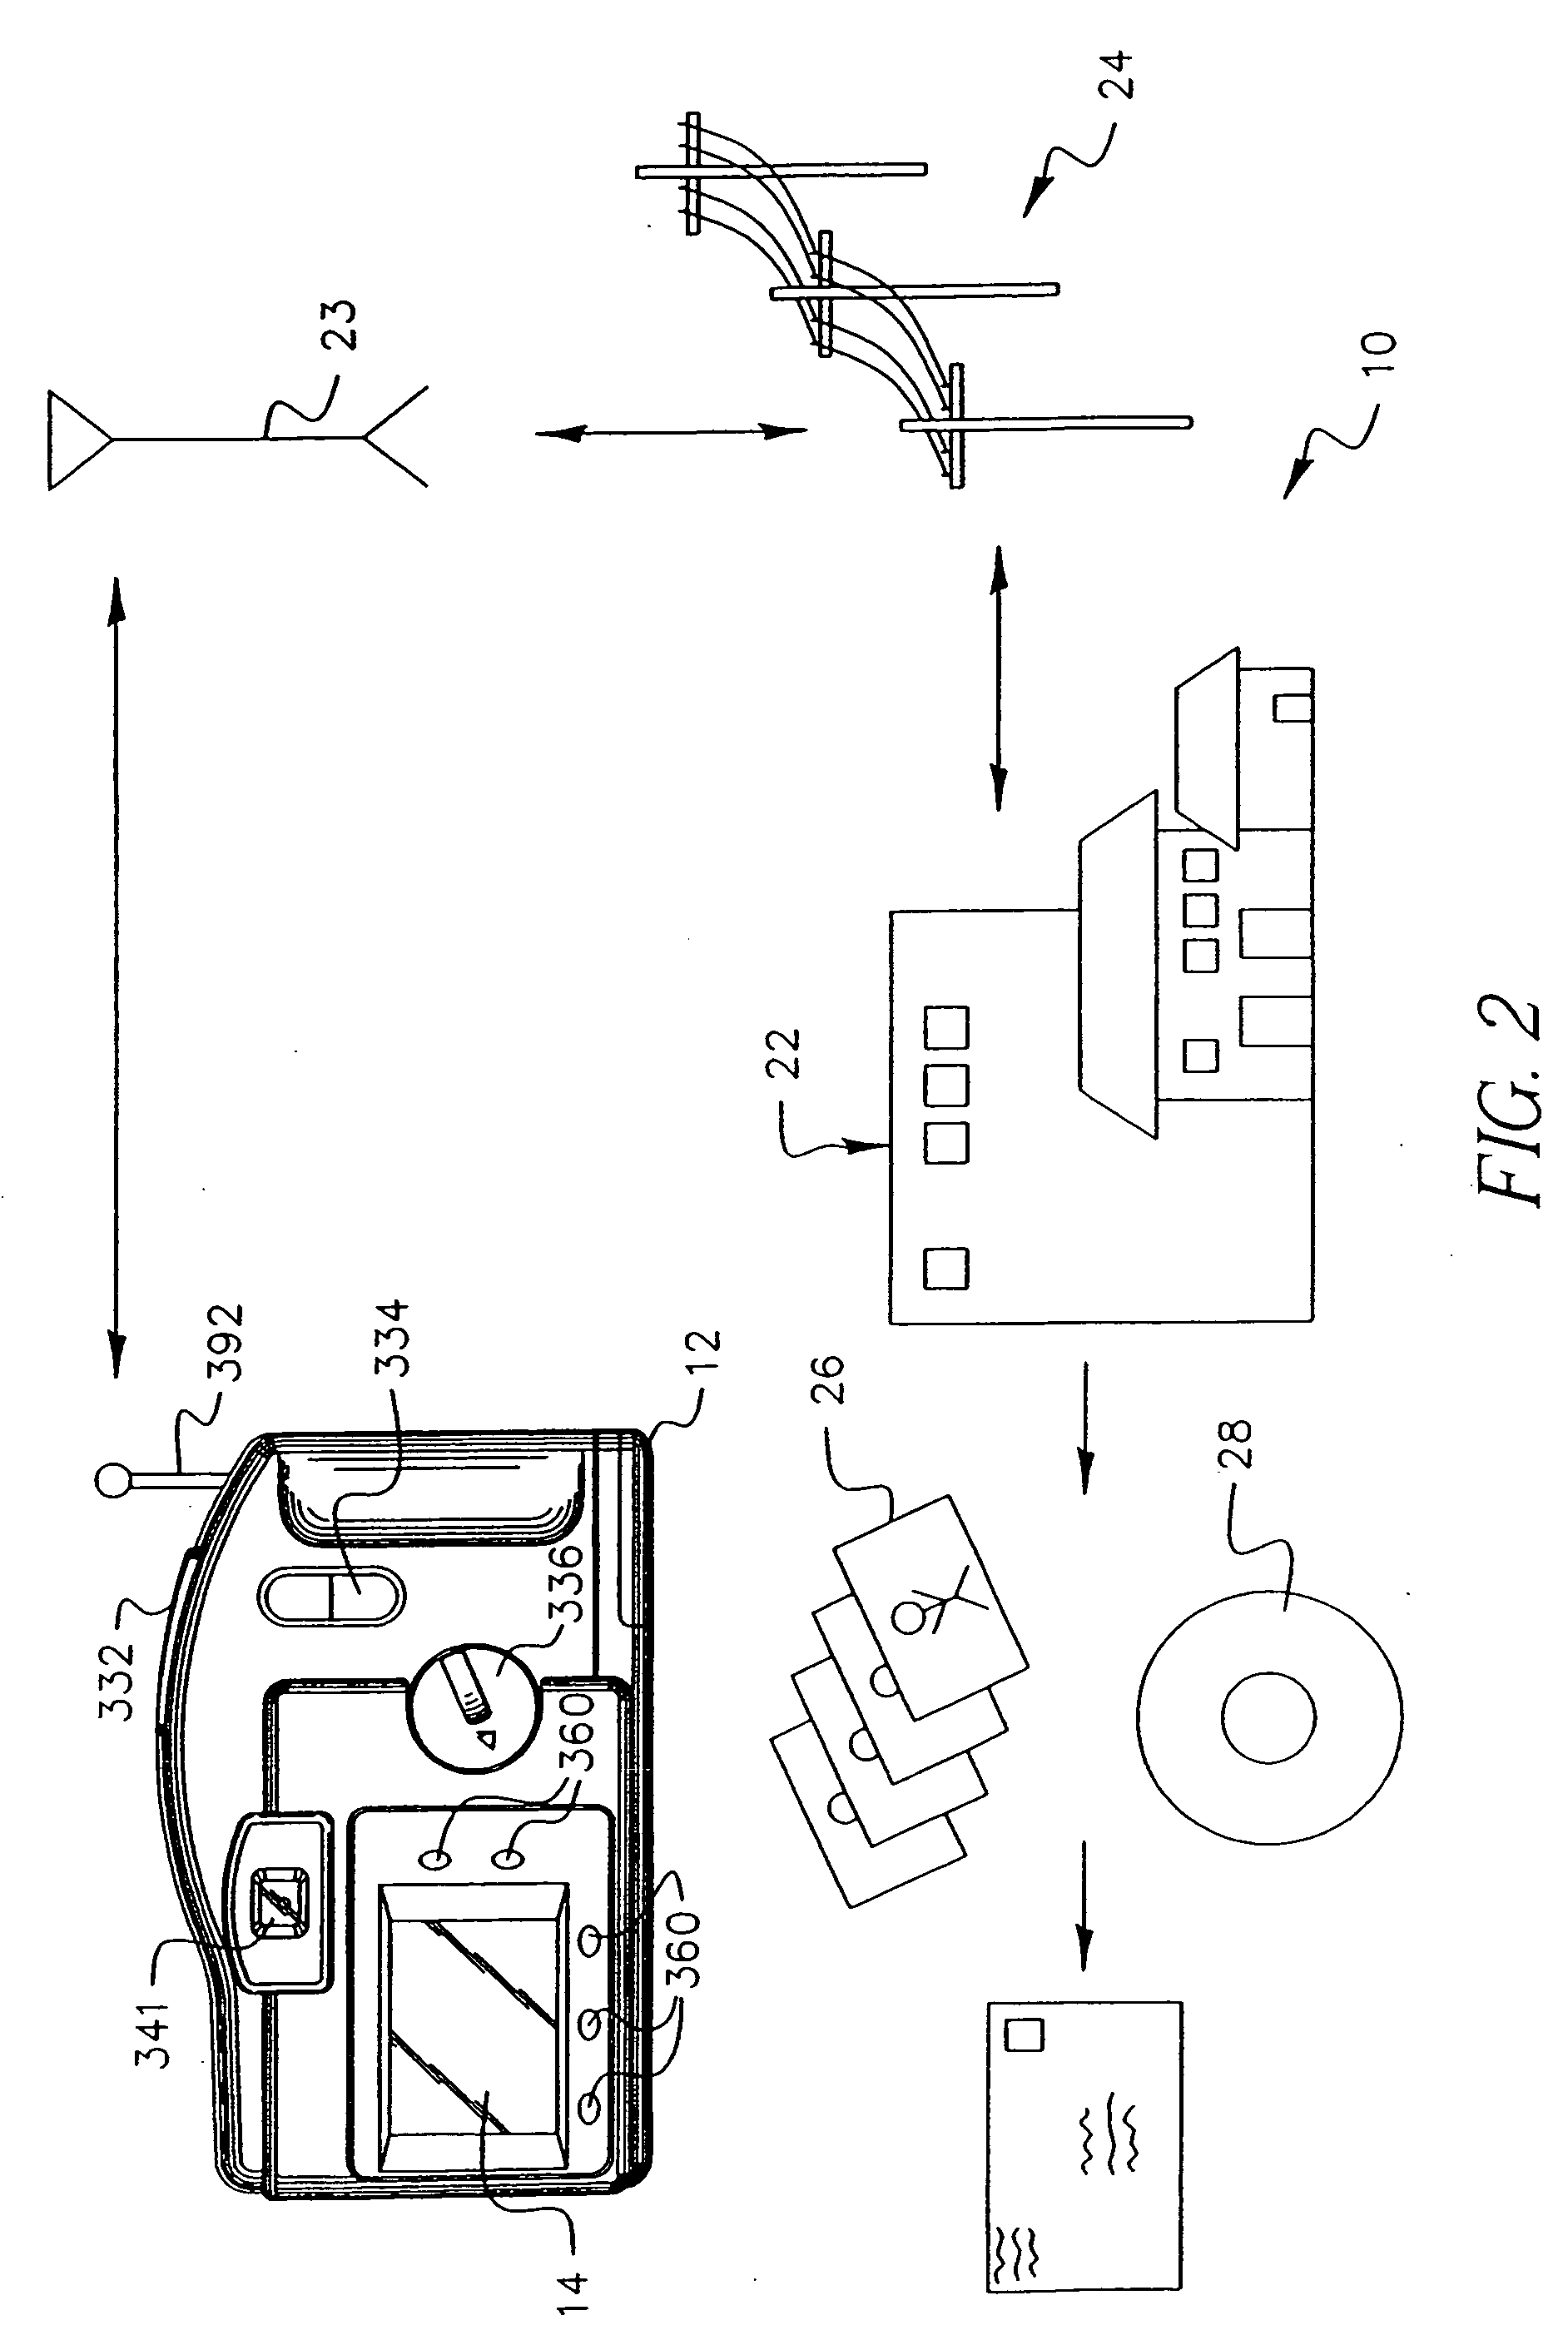 System and camera for transferring digital images to a service provider